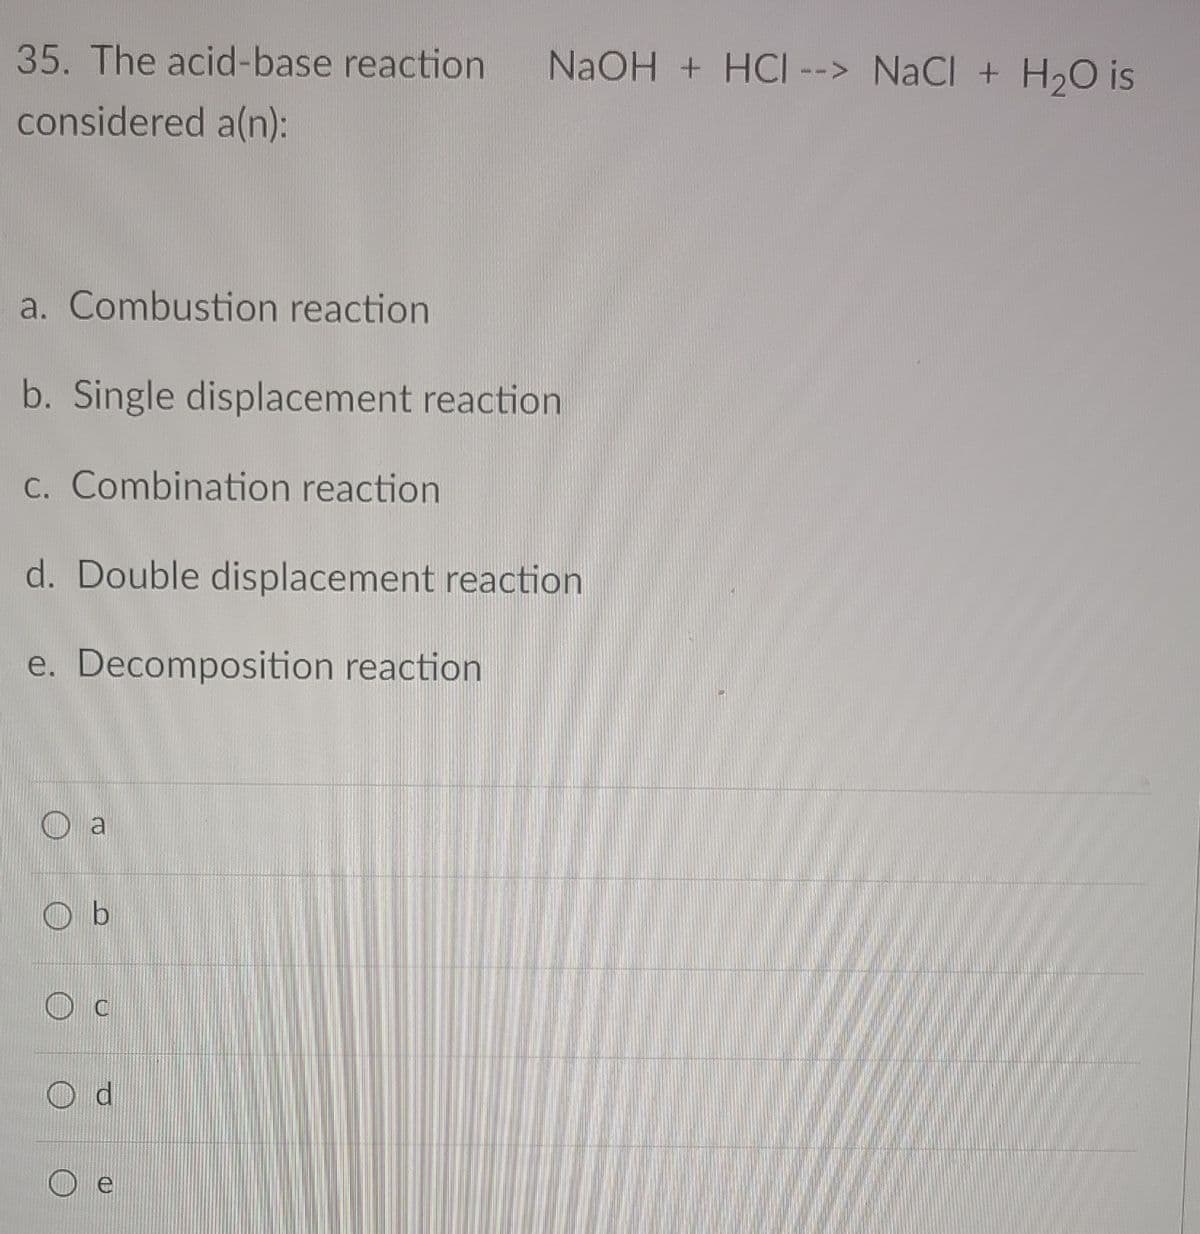 35. The acid-base reaction
NAOH + HCI --> NaCl + H20 is
considered a(n):
a. Combustion reaction
b. Single displacement reaction
C. Combination reaction
d. Double displacement reaction
e. Decomposition reaction
O a
O b
